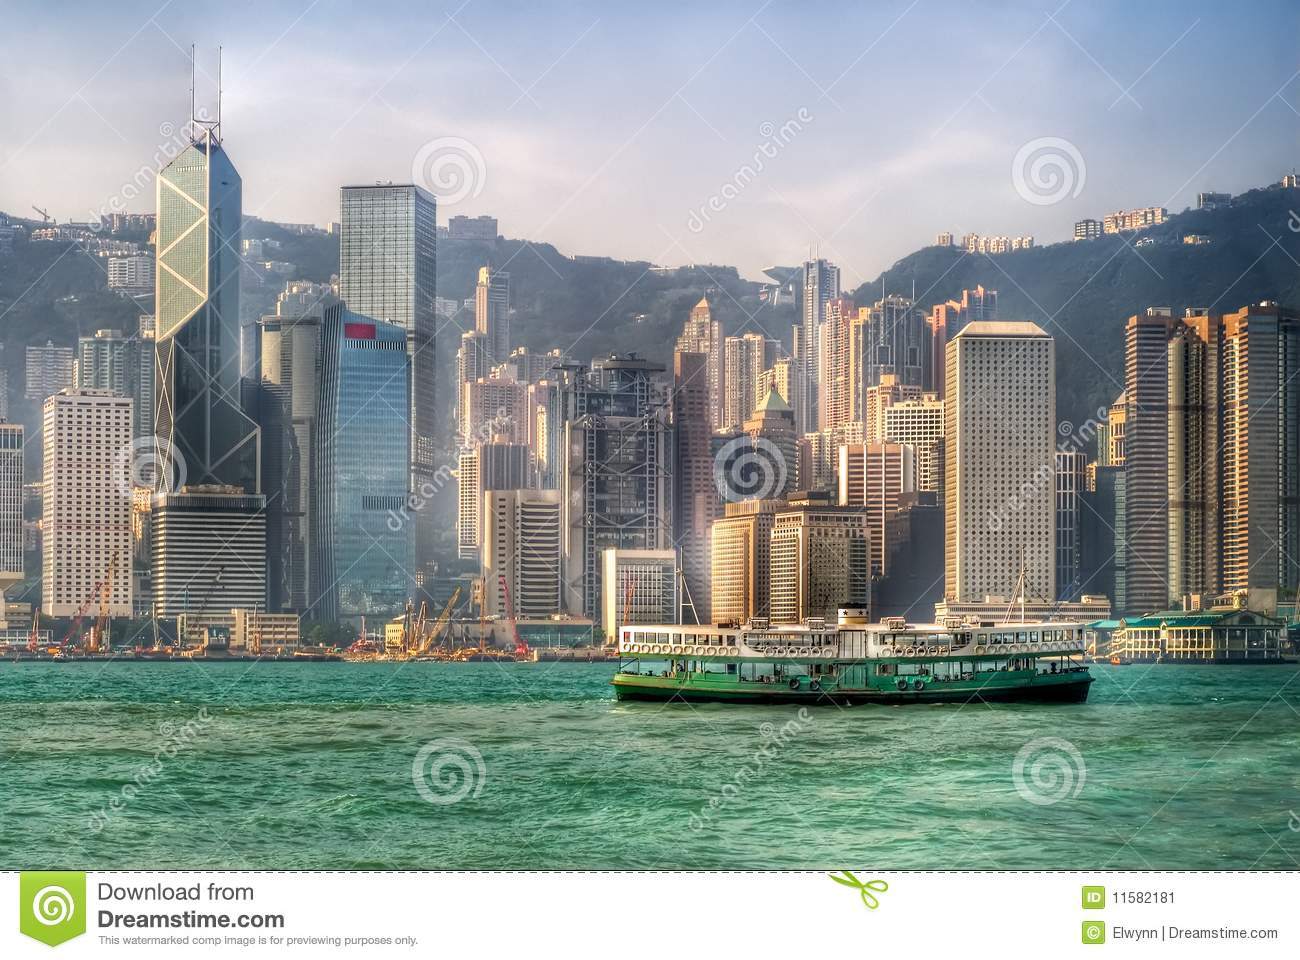 Ferry On Victoria Harbor In Hong Kong Stock Image   Image  11582181